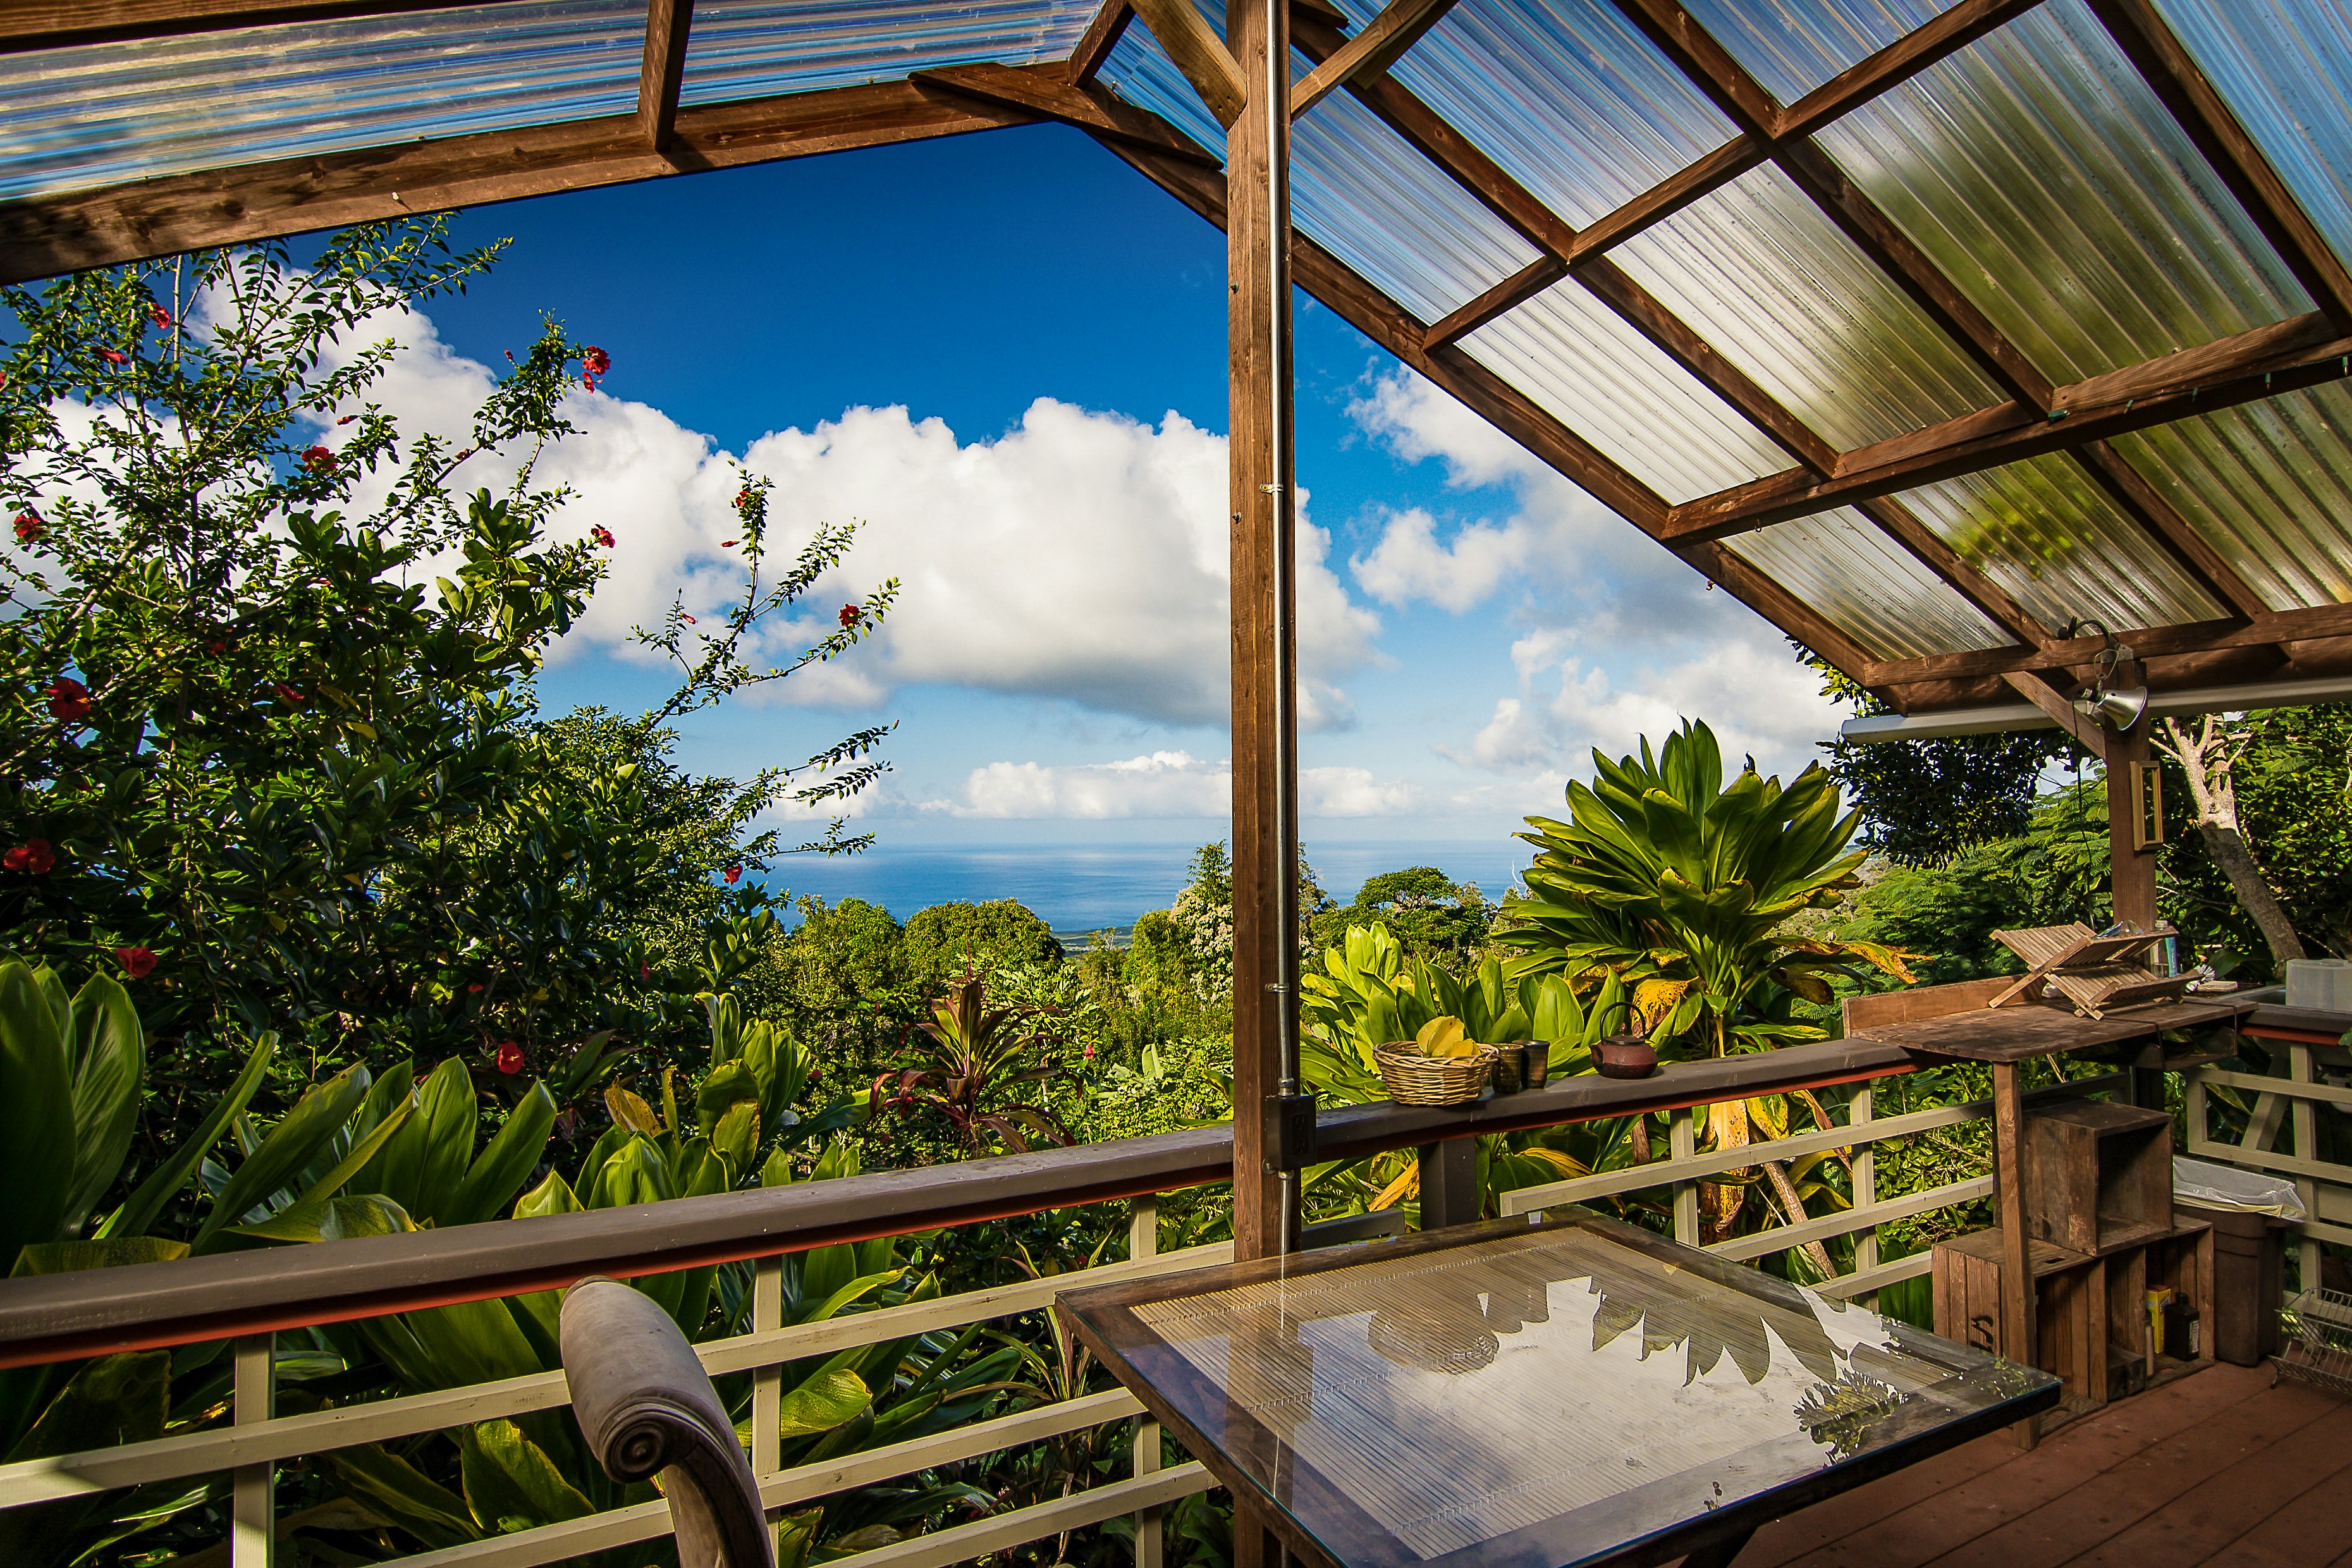 A shaded balcony overlooking dense jungle, with the ocean and blue skies beyoned